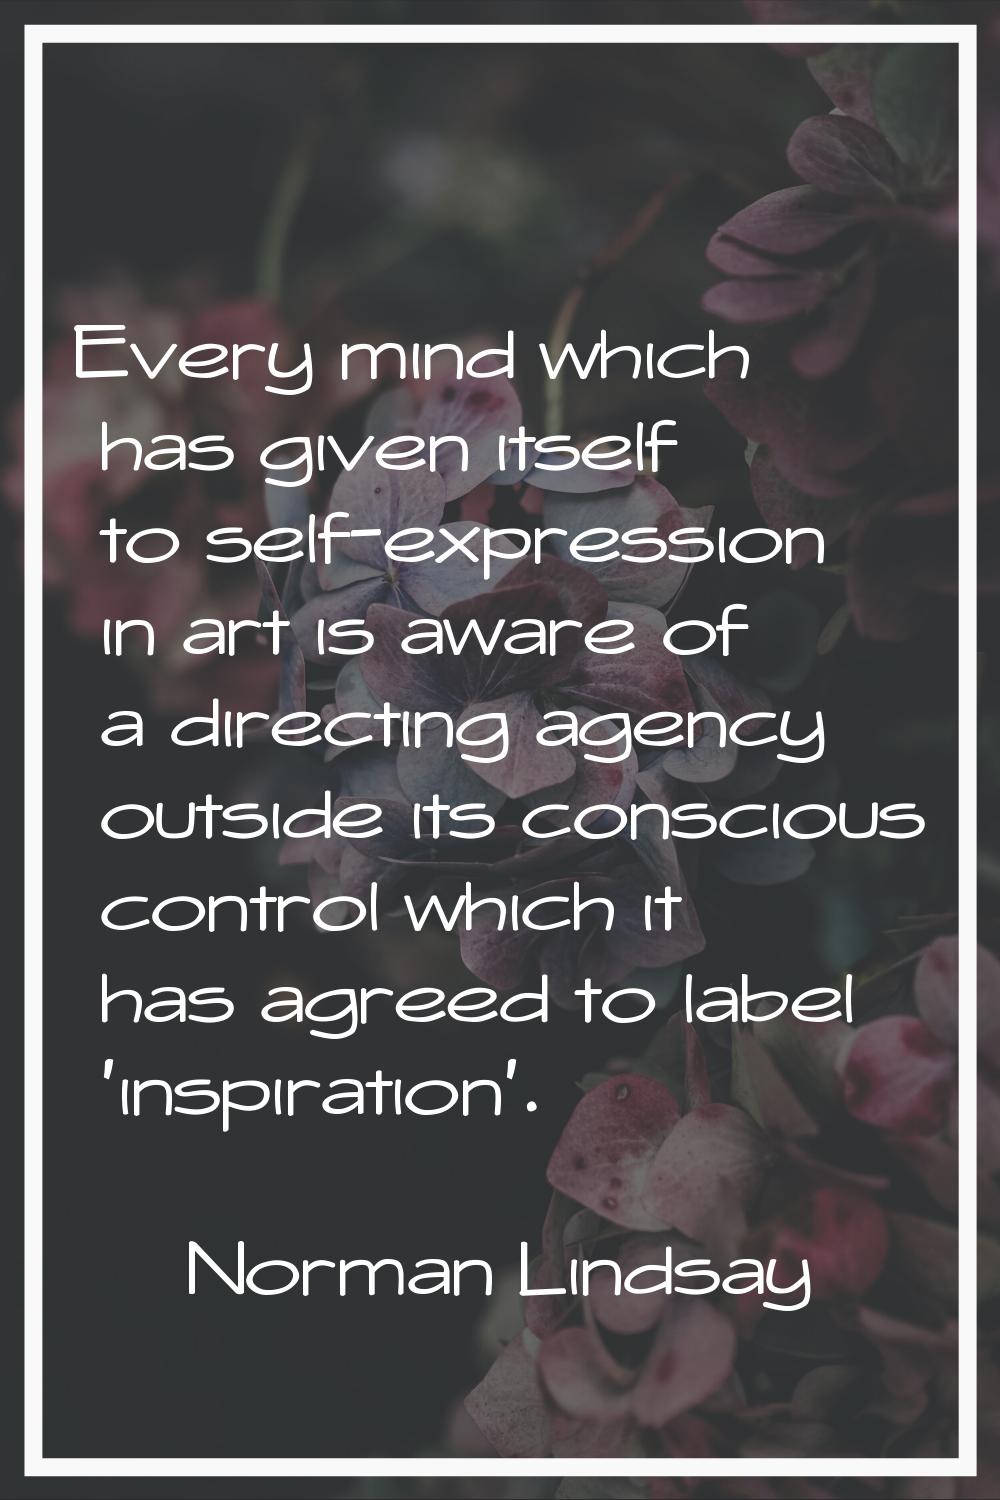 Every mind which has given itself to self-expression in art is aware of a directing agency outside 